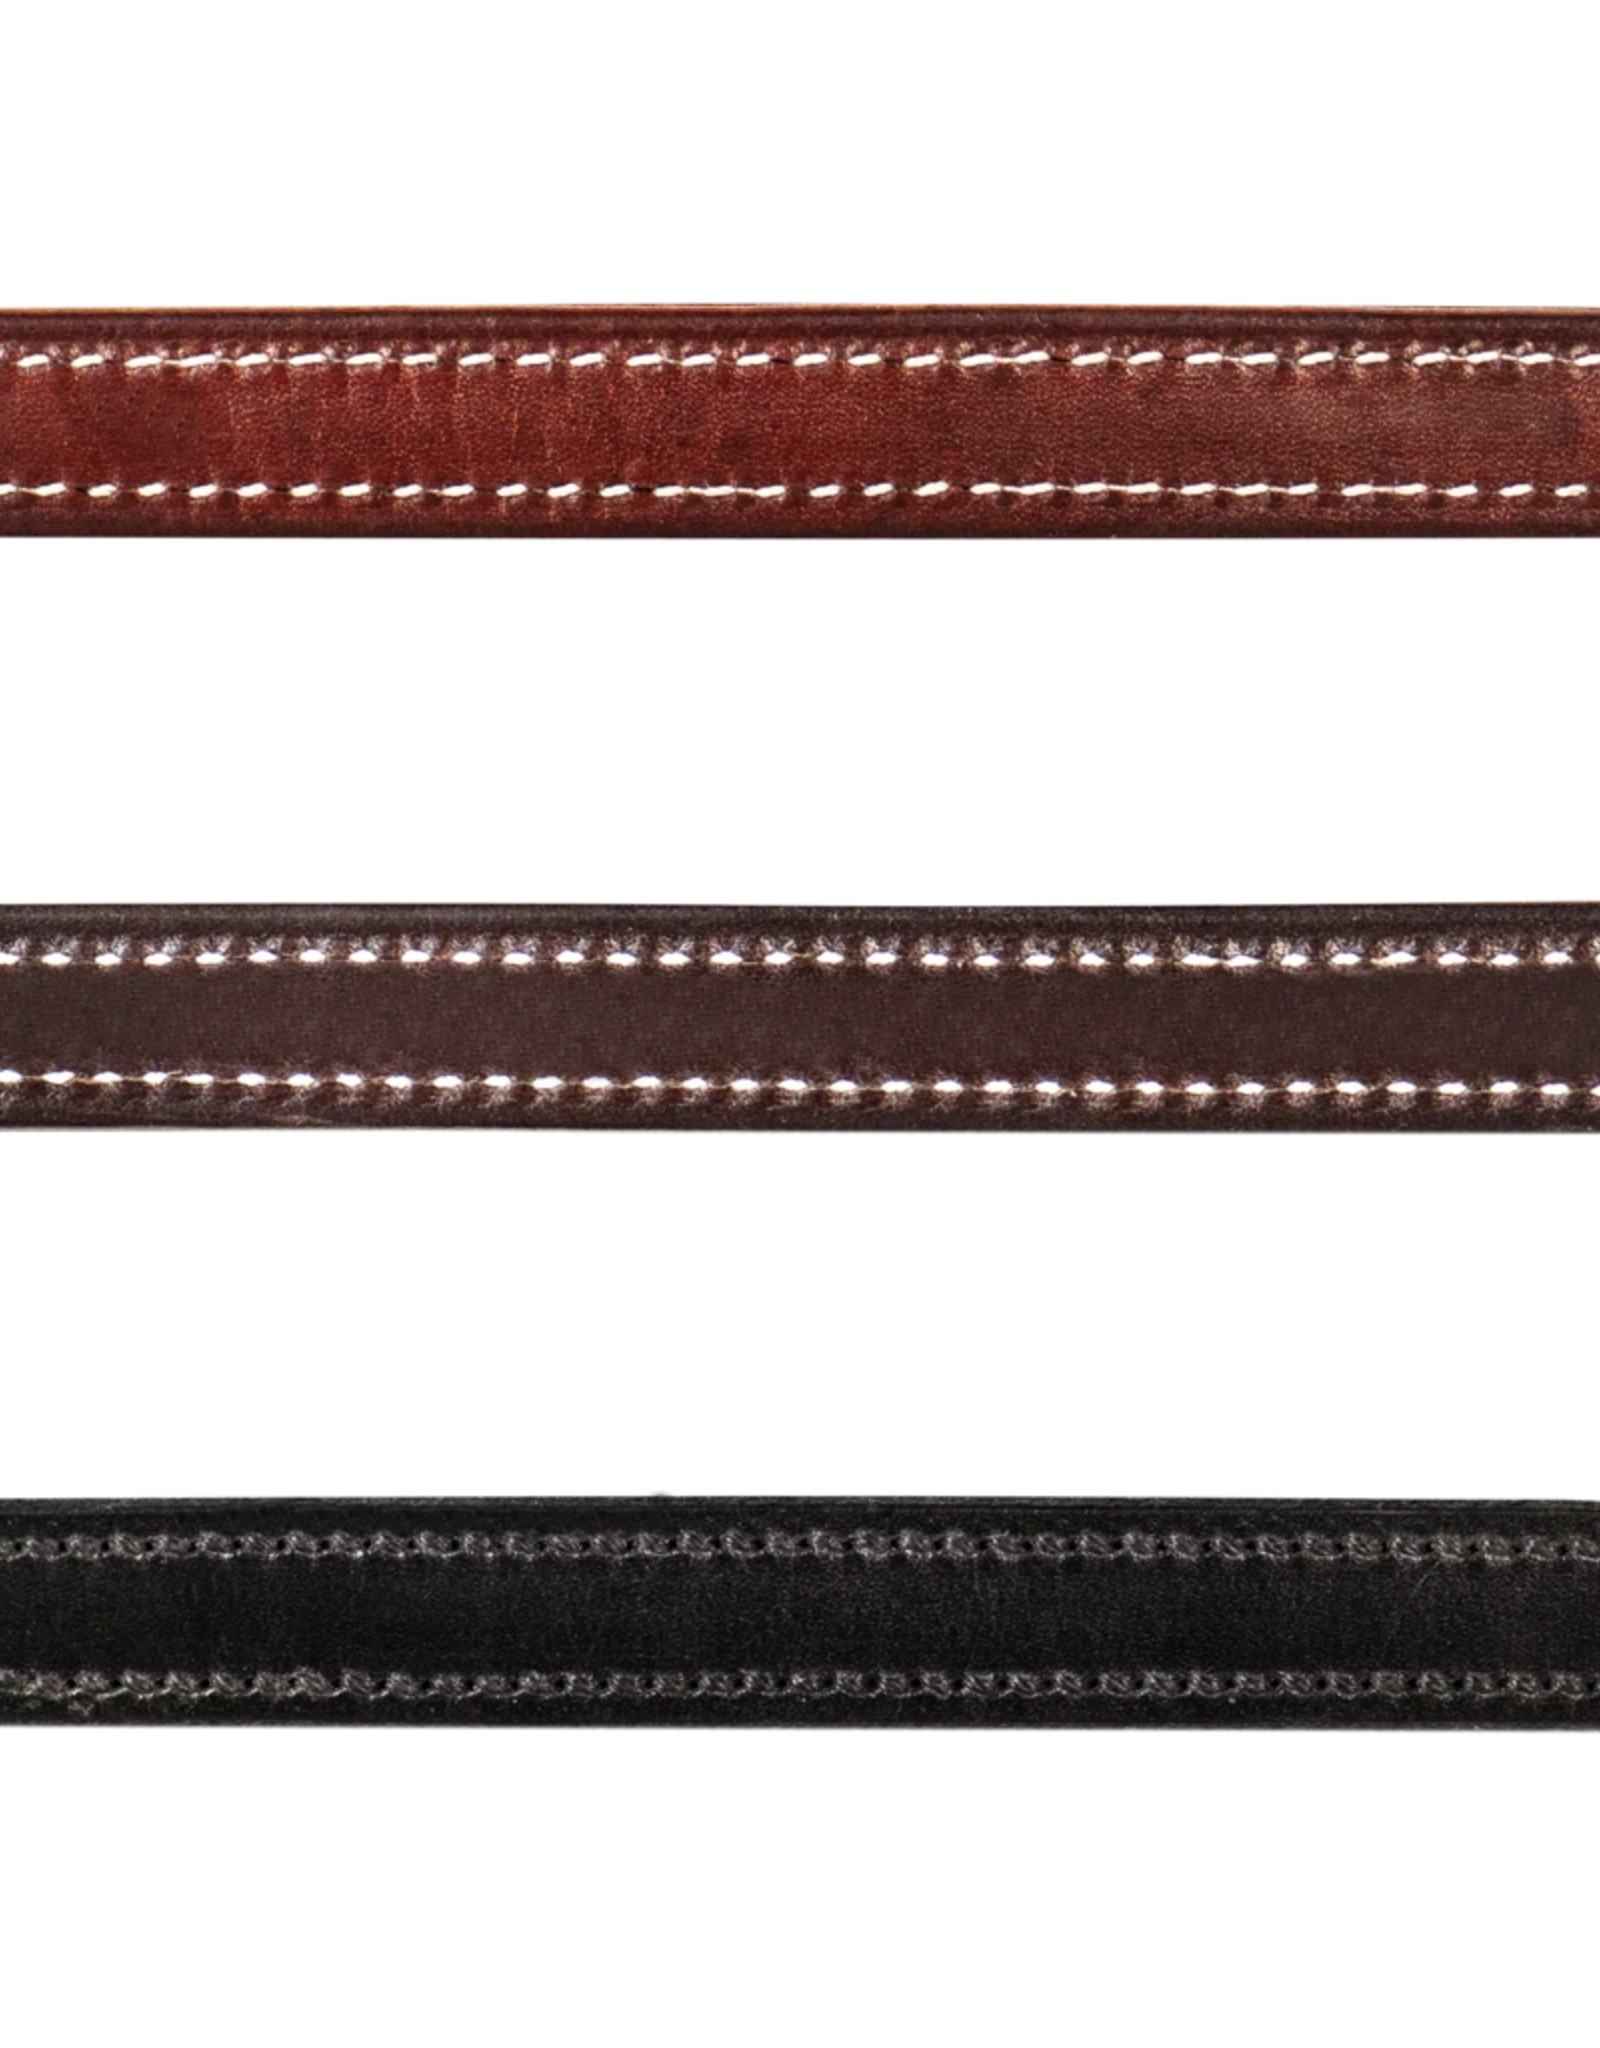 WALSH LEATHER LEAD WITH CHAIN